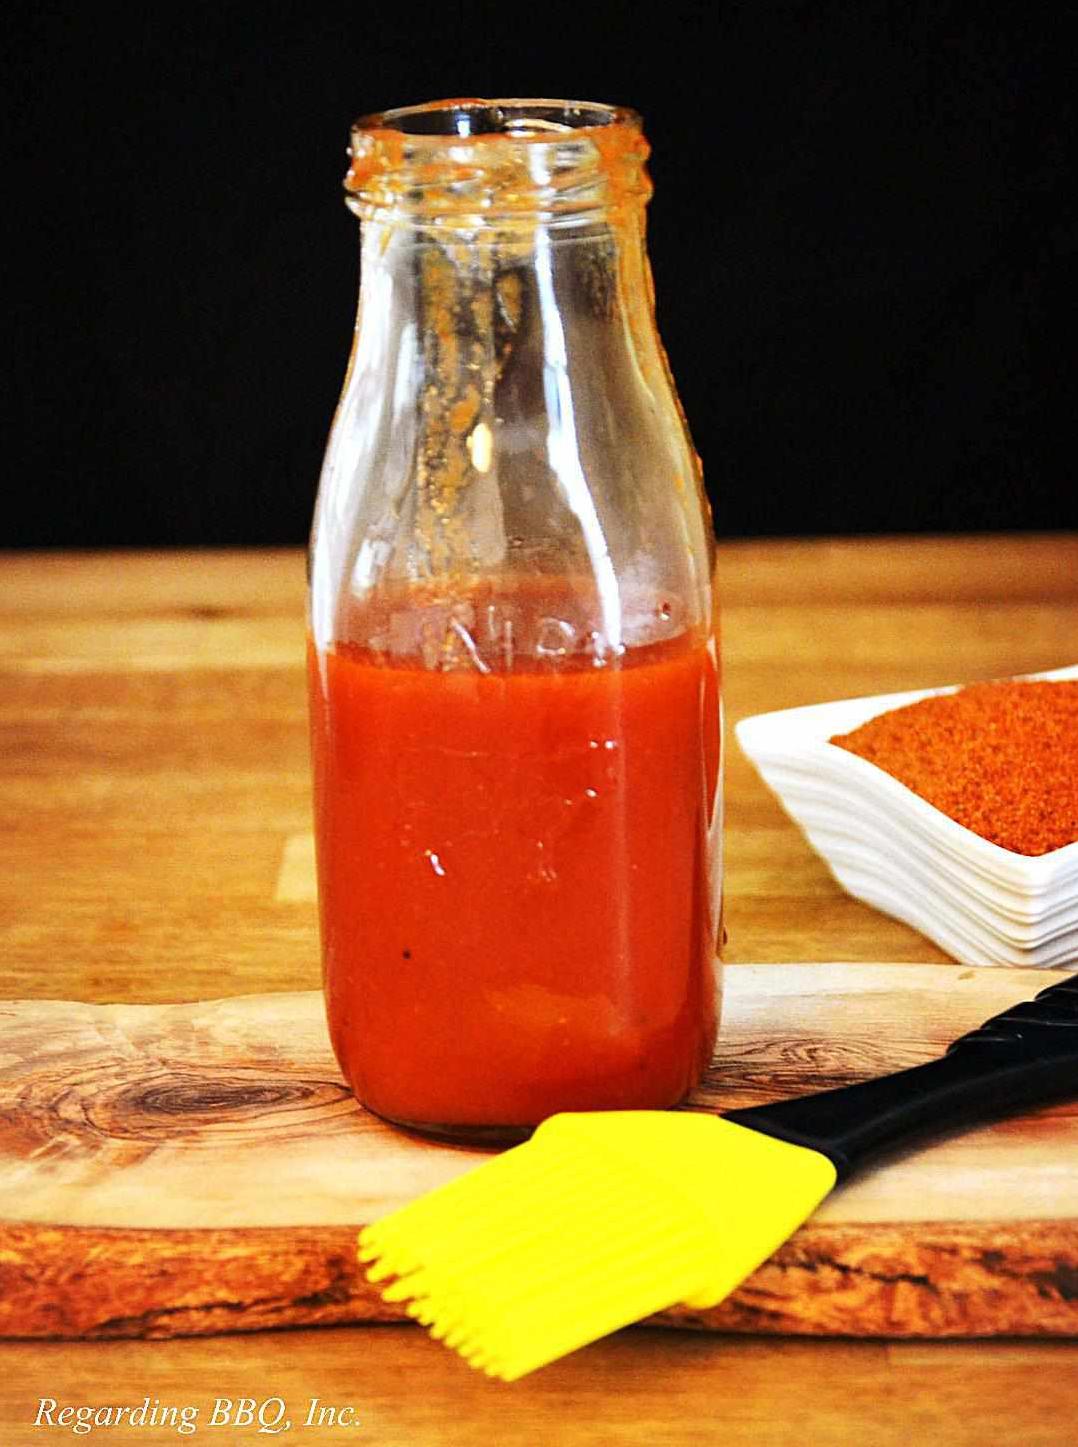  This sauce will make your taste buds sing with happiness!